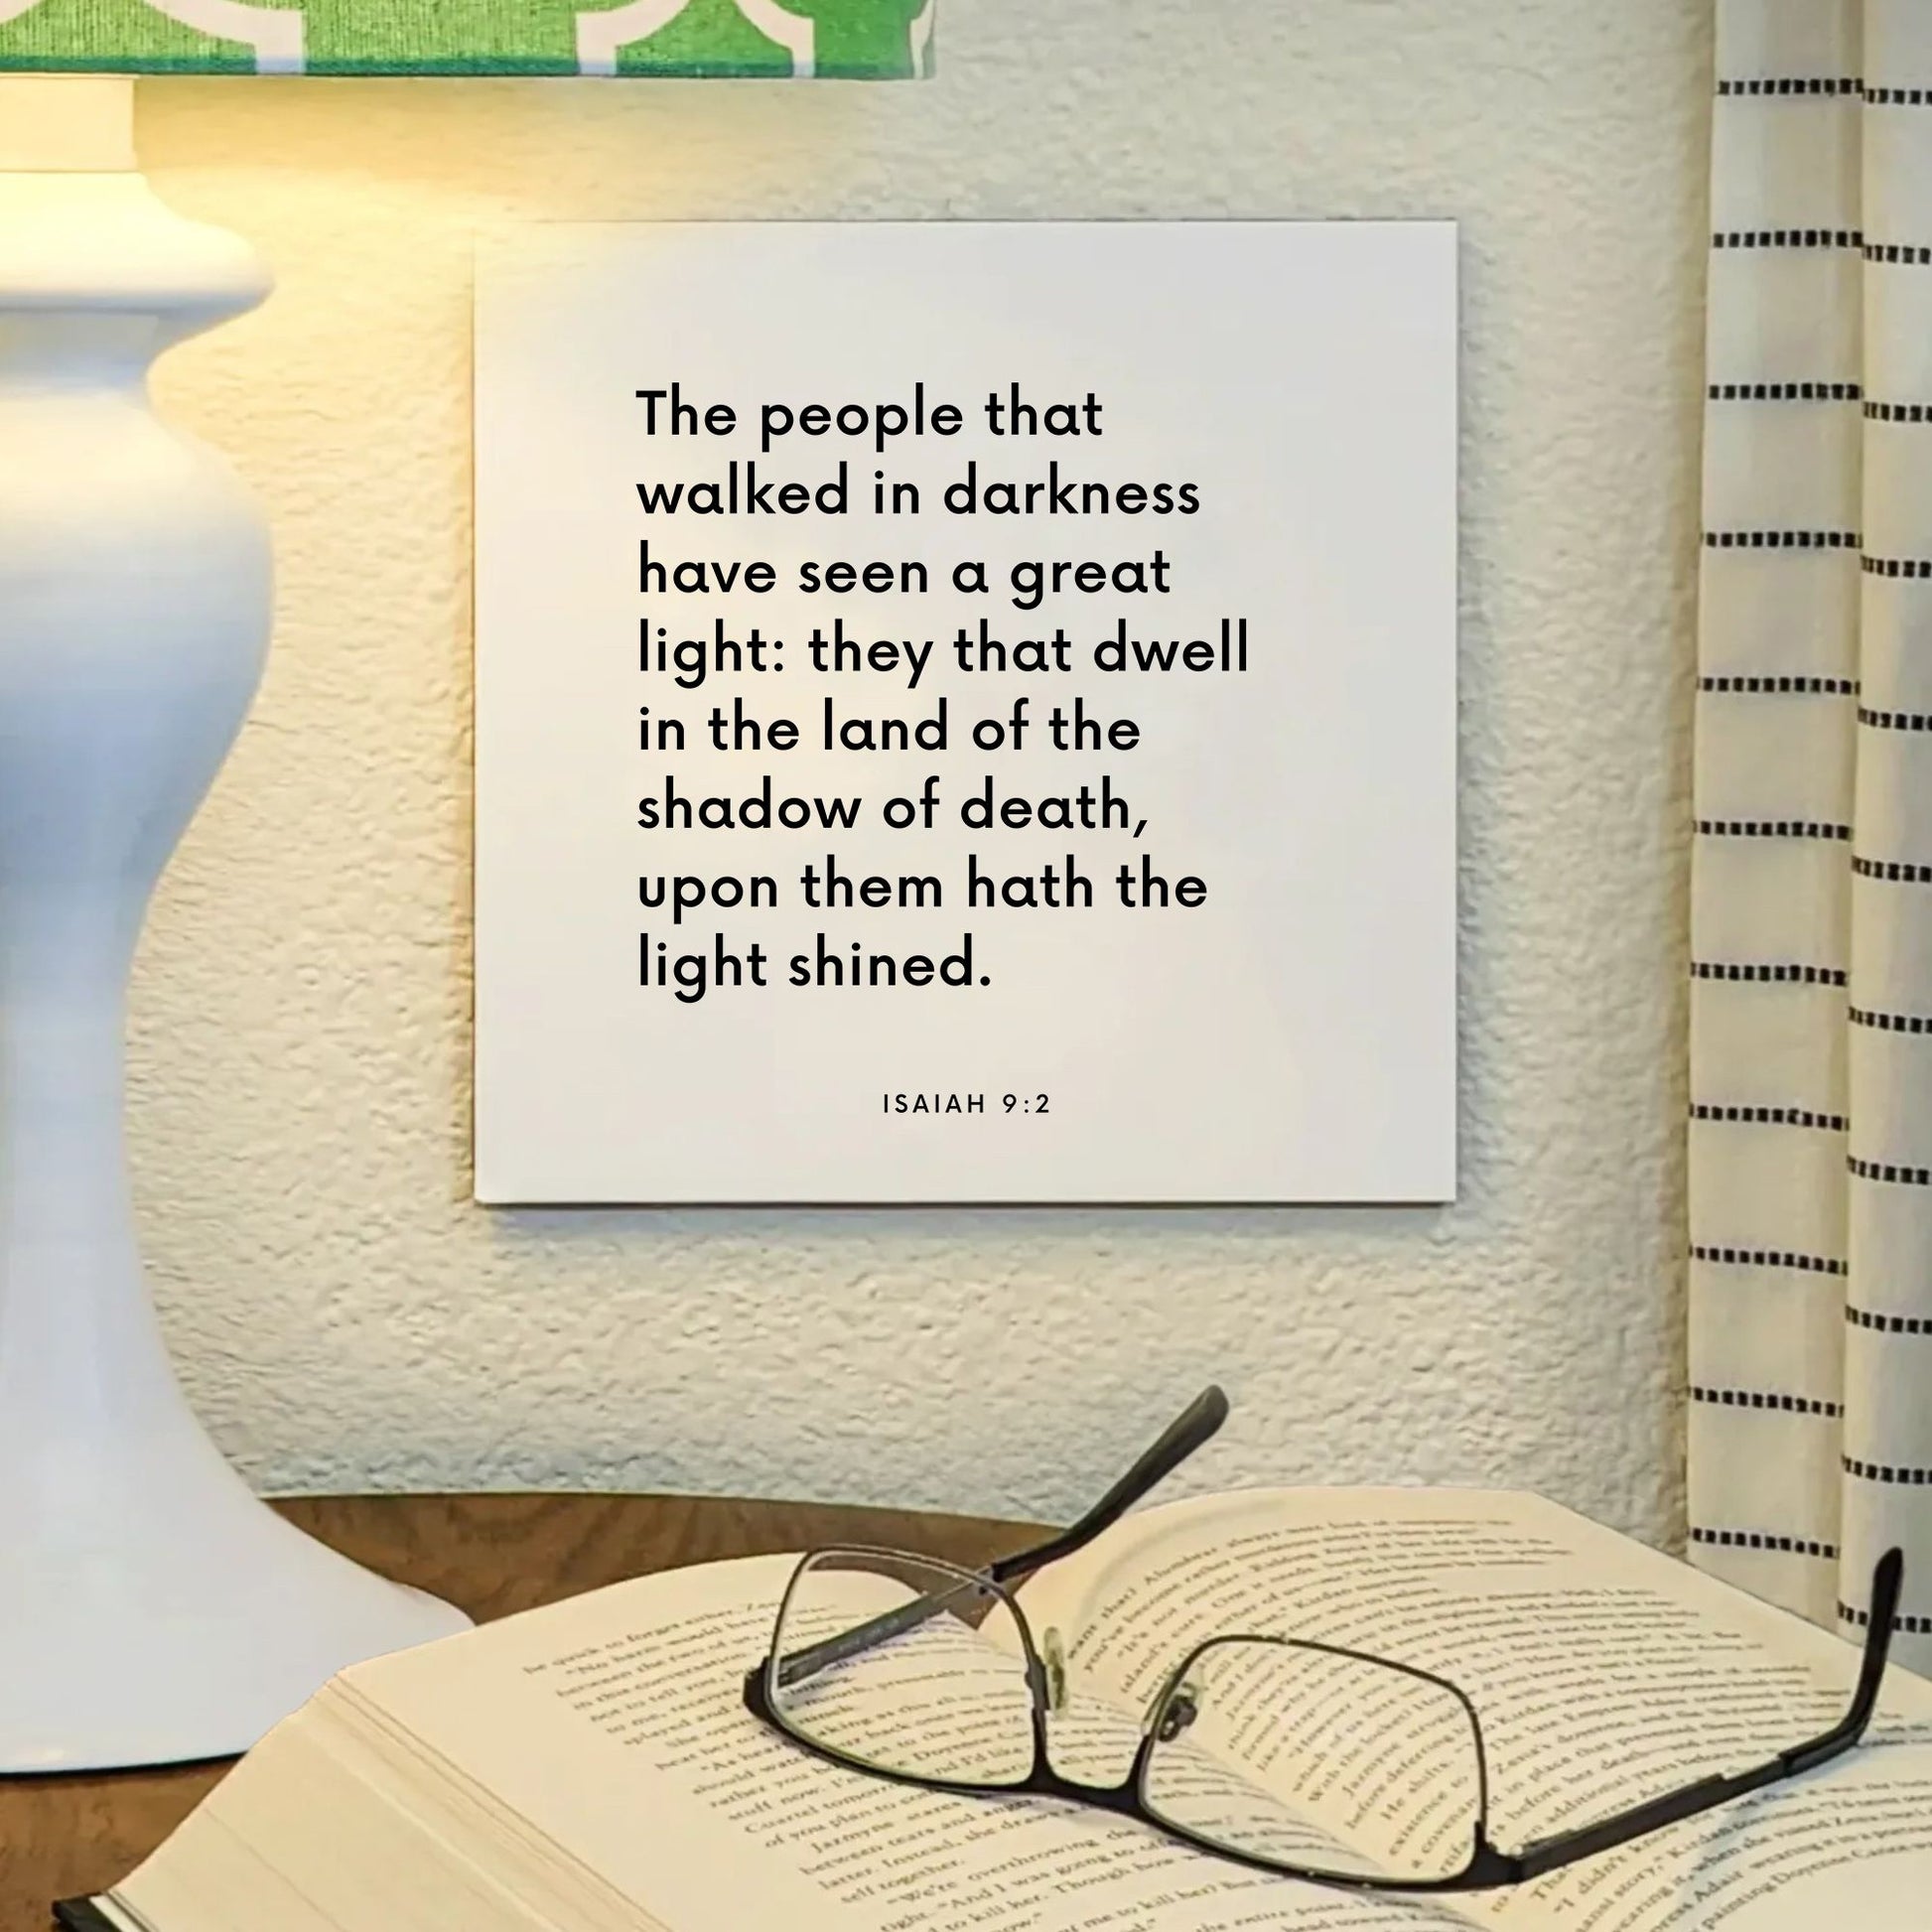 Lamp mouting of the scripture tile for Isaiah 9:2 - "The people that walked in darkness have seen a great light"